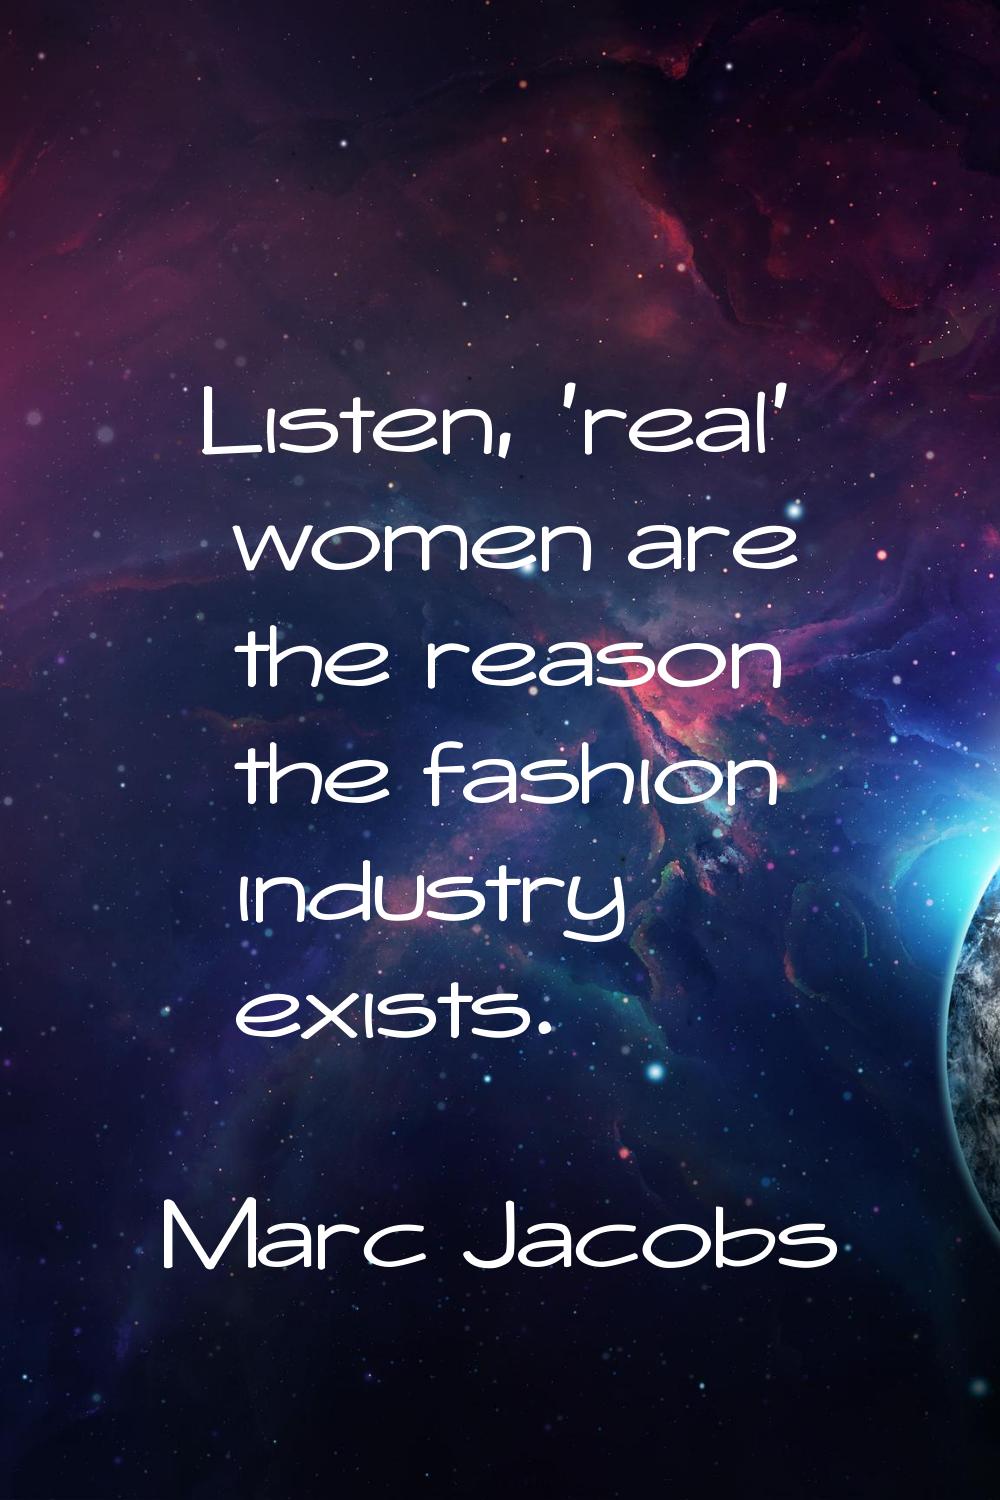 Listen, 'real' women are the reason the fashion industry exists.